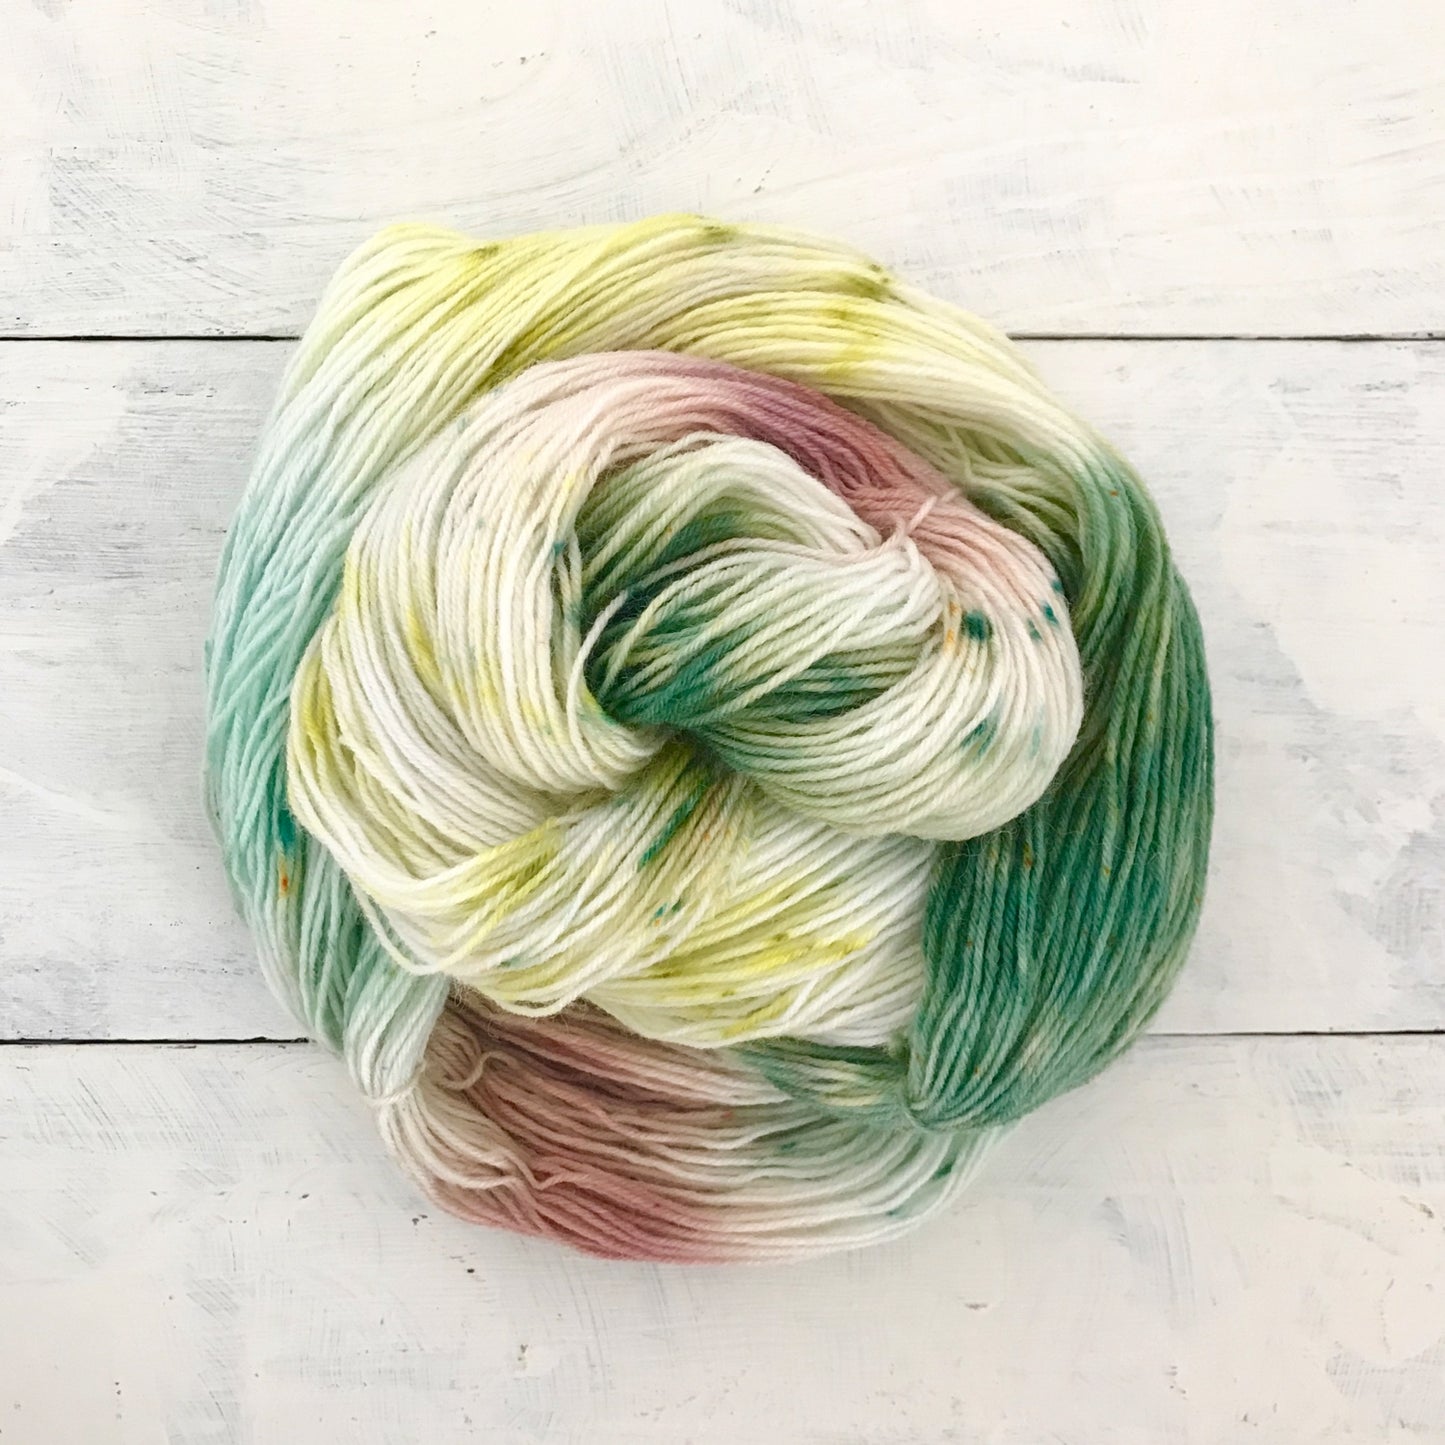 Hand-dyed yarn No.33 sock yarn “Une forêt de sapins en hiver”